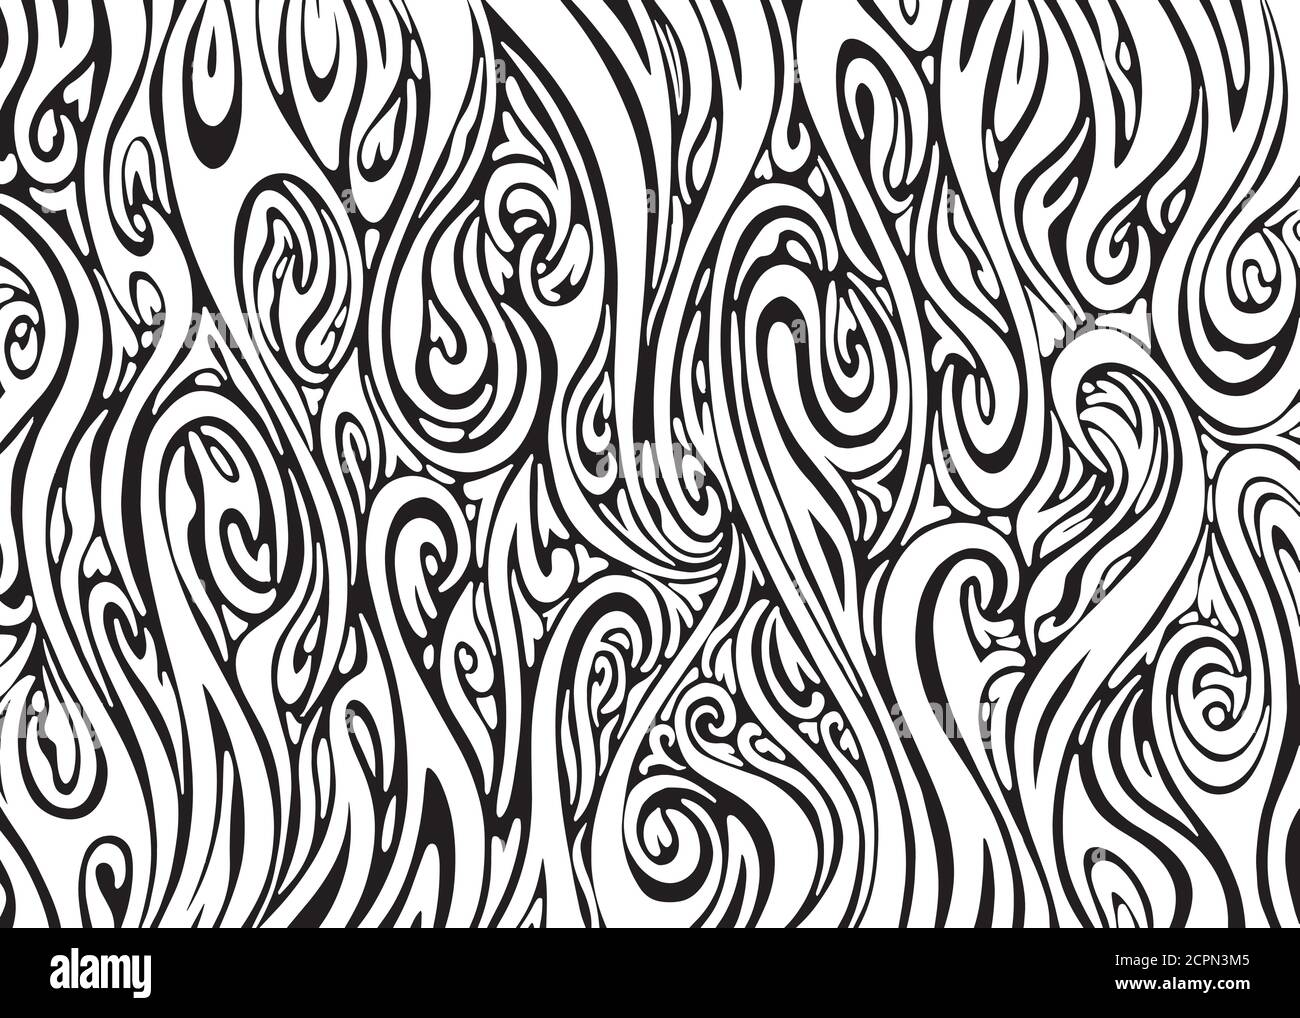 937 Background Abstract Black White For FREE - MyWeb